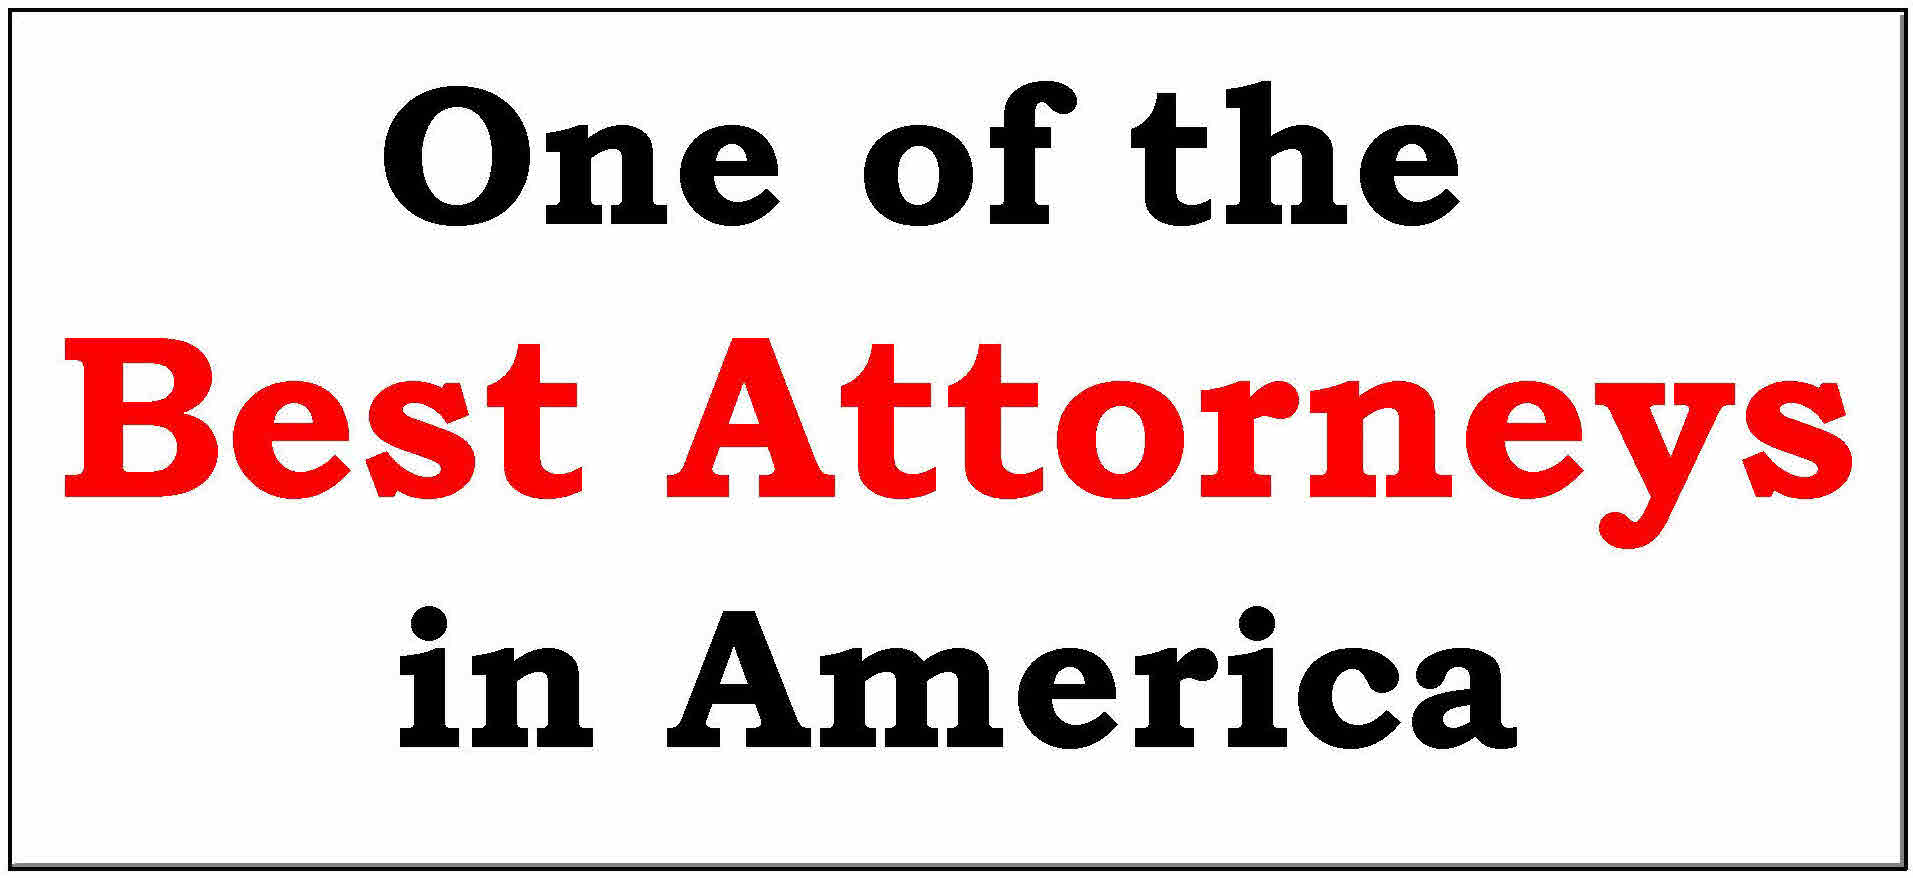 Selected as one of the 'Best Lawyers' in America every year since 2006